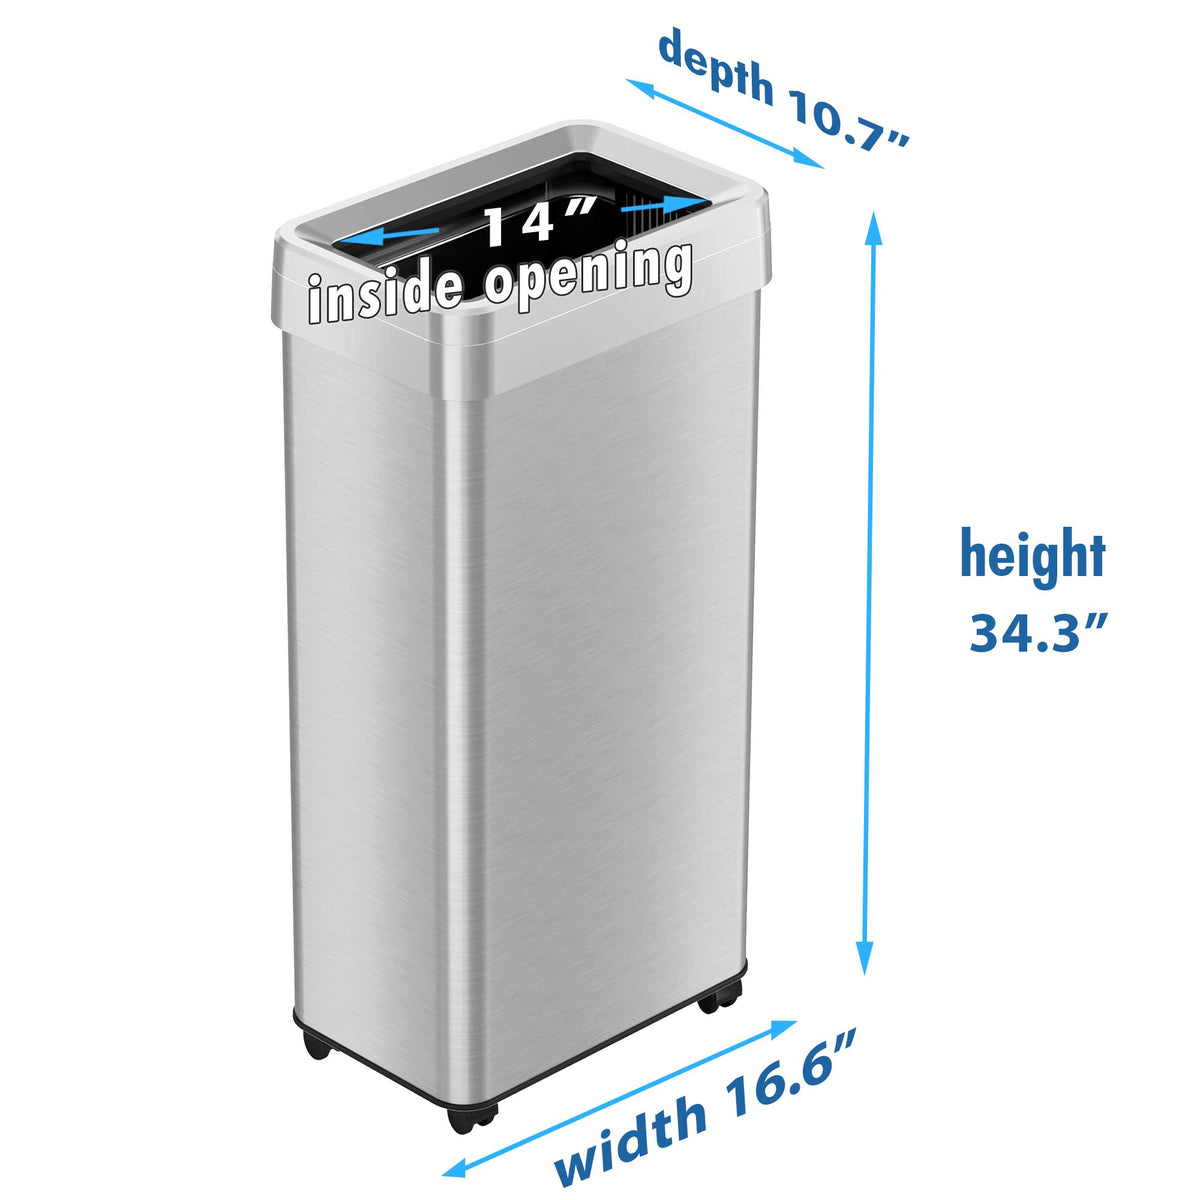 21 Gallon / 80 Liter Rectangular Open Top Trash Can with Wheels dimensions